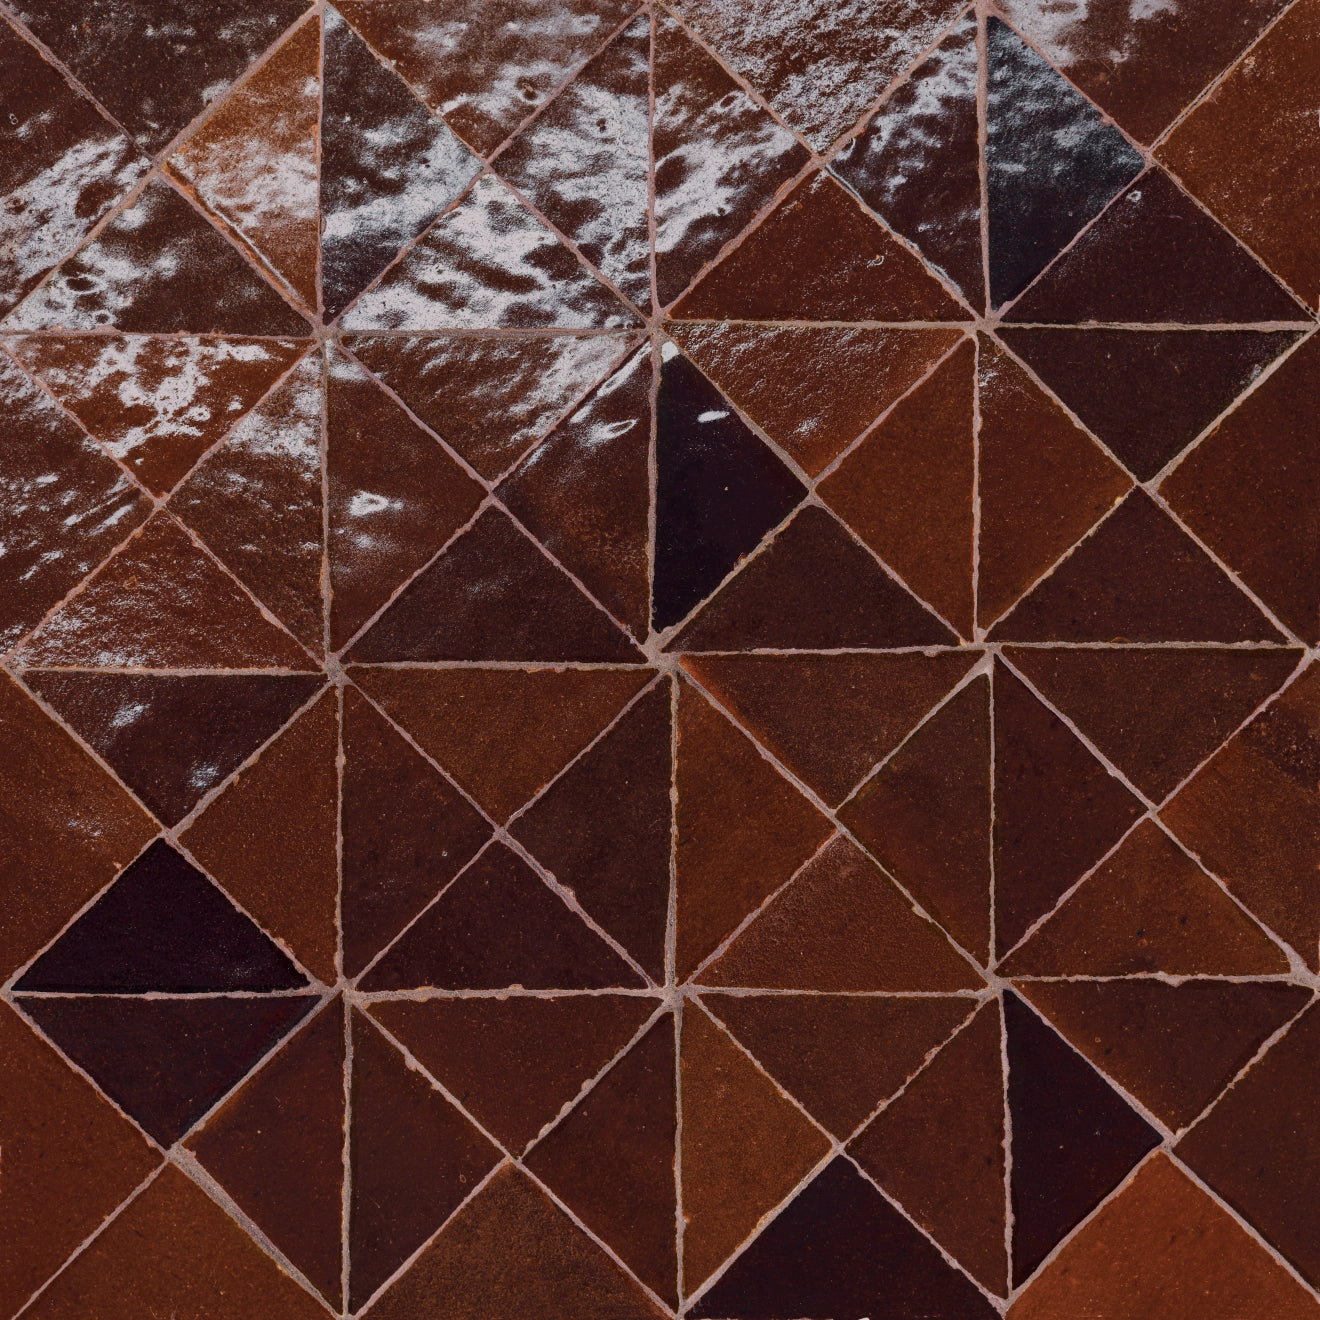 Brown and red tone geometric tiles.